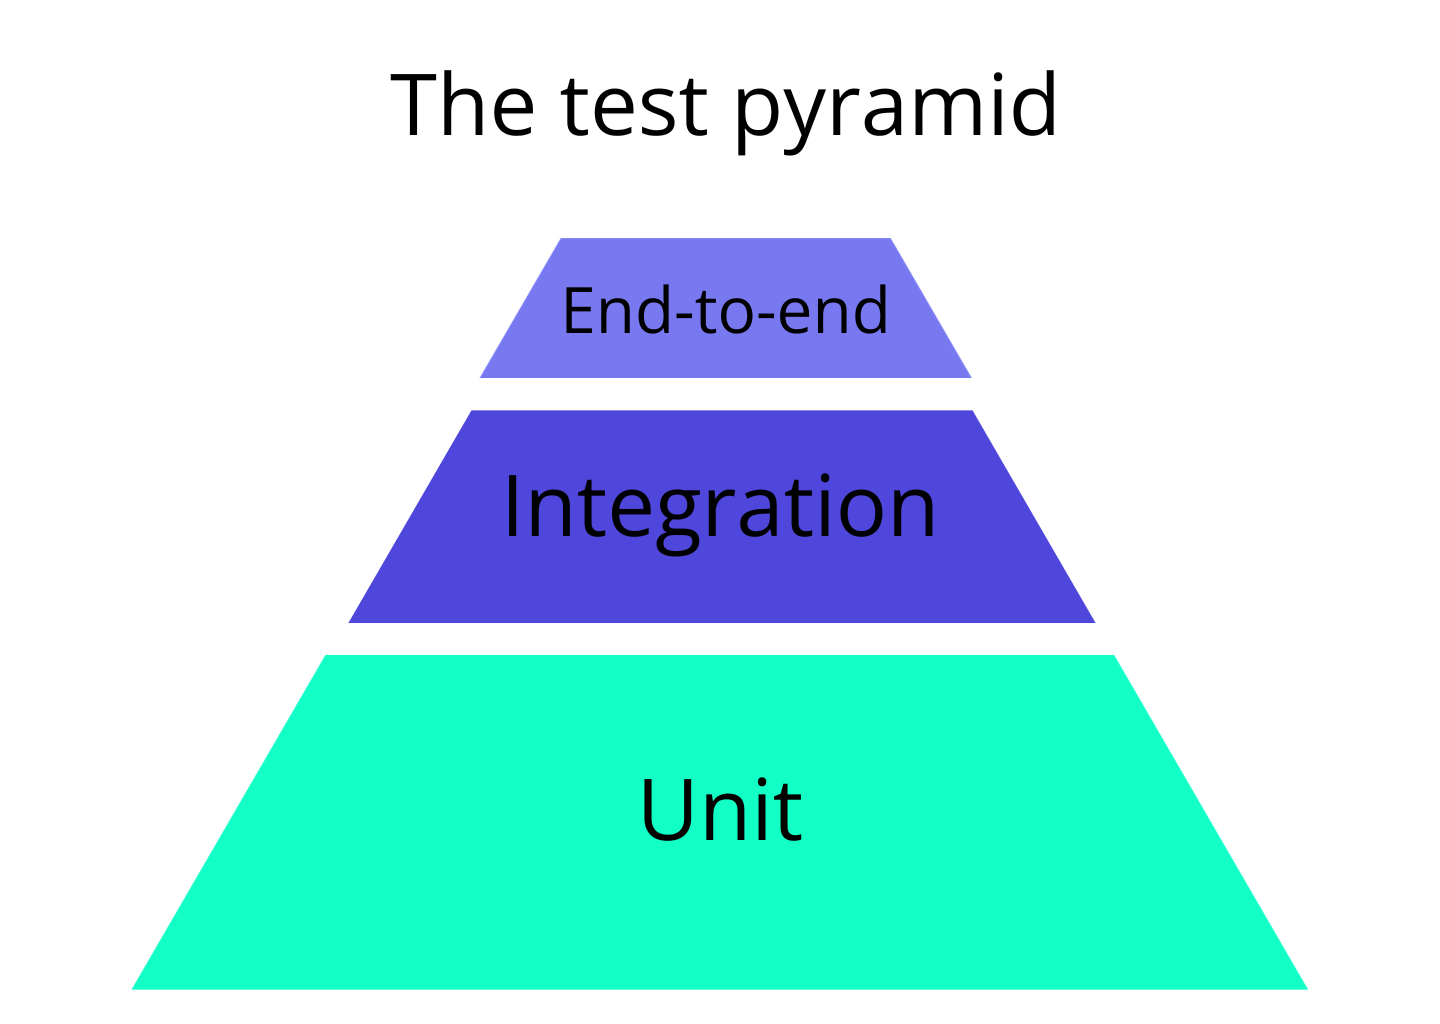 "The test pyramid" above a pyramid in three sections, top to bottom: Unit, Integration, End-to-end